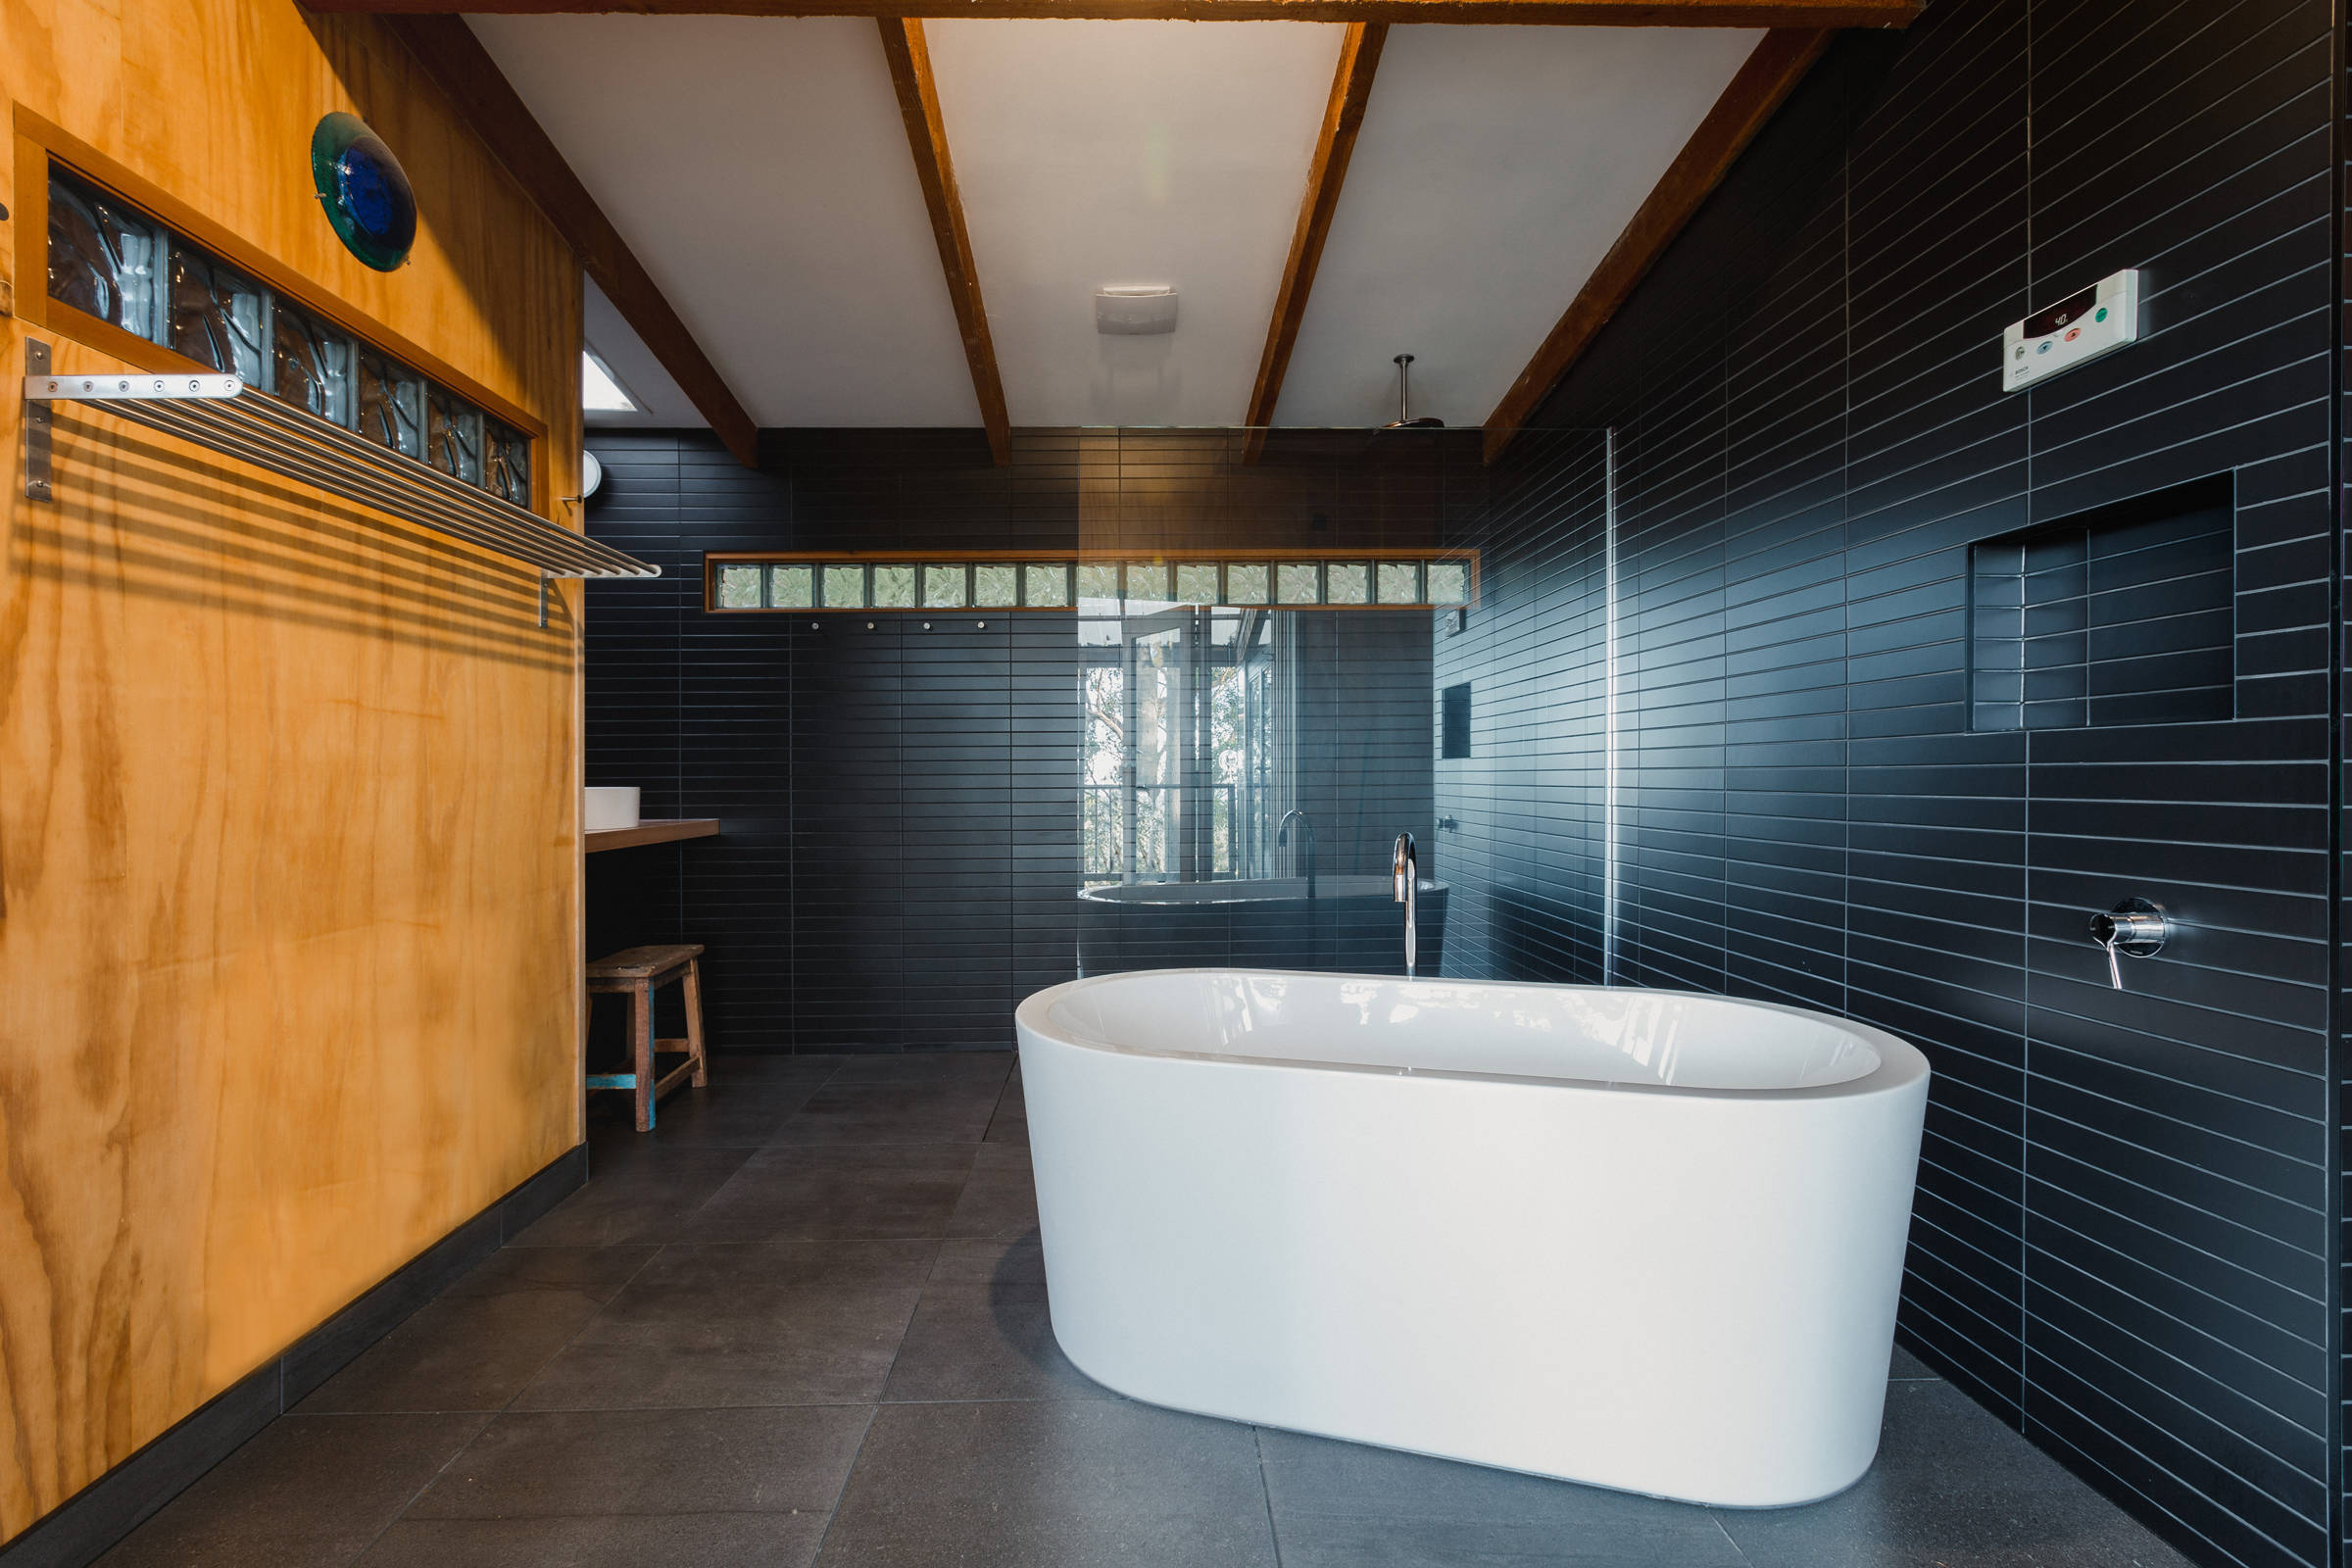 Custom Japanese inspired bathroom renovation features a freestanding bath, black mosaic tiles, laid with the utmost accuracy. This architectural bathroom renovation was designed to give a contemporary feel with increased natural light from a new skylight. Photo: Jordan Davis.